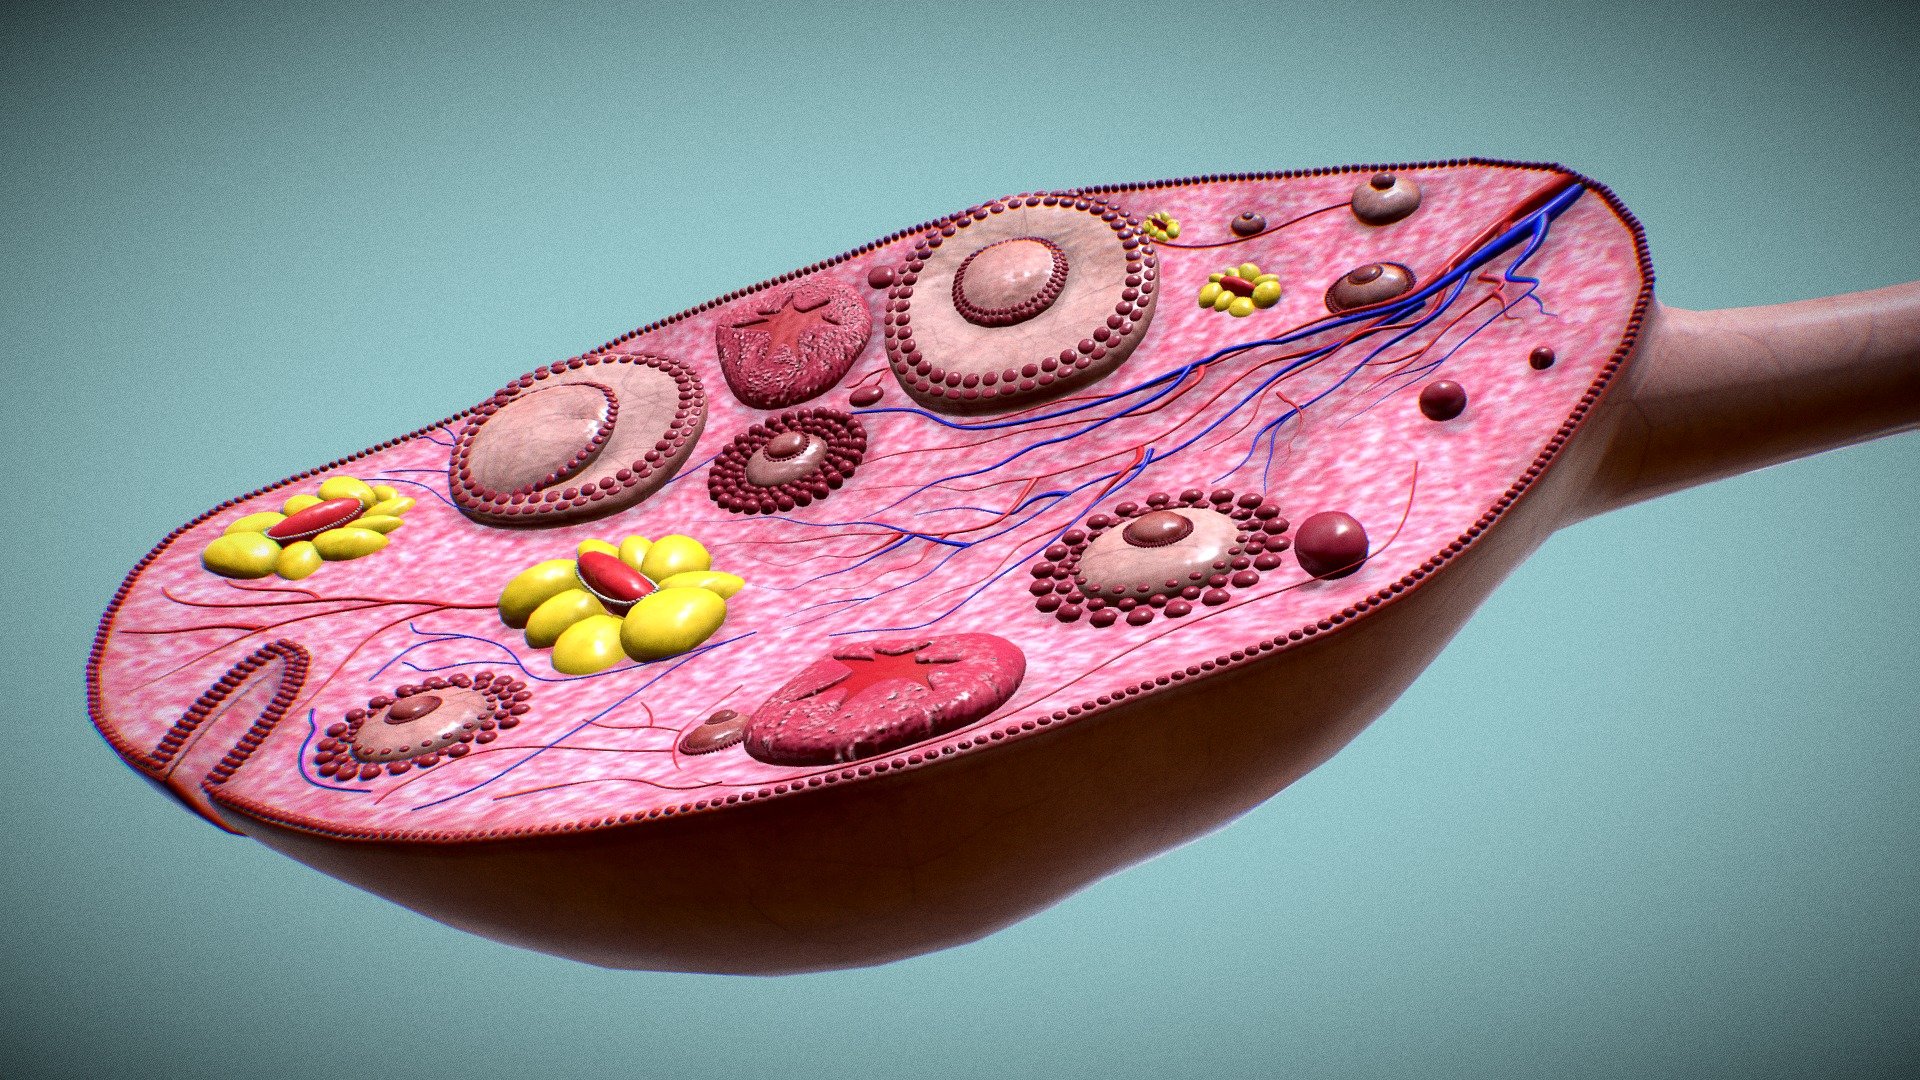 One of a pair of female glands in which the eggs form and the female hormones estrogen and progesterone are made. These hormones play an important role in female traits, such as breast development, body shape, and body hair. They are also involved in the menstrual cycle, fertility, and pregnancy 3d model